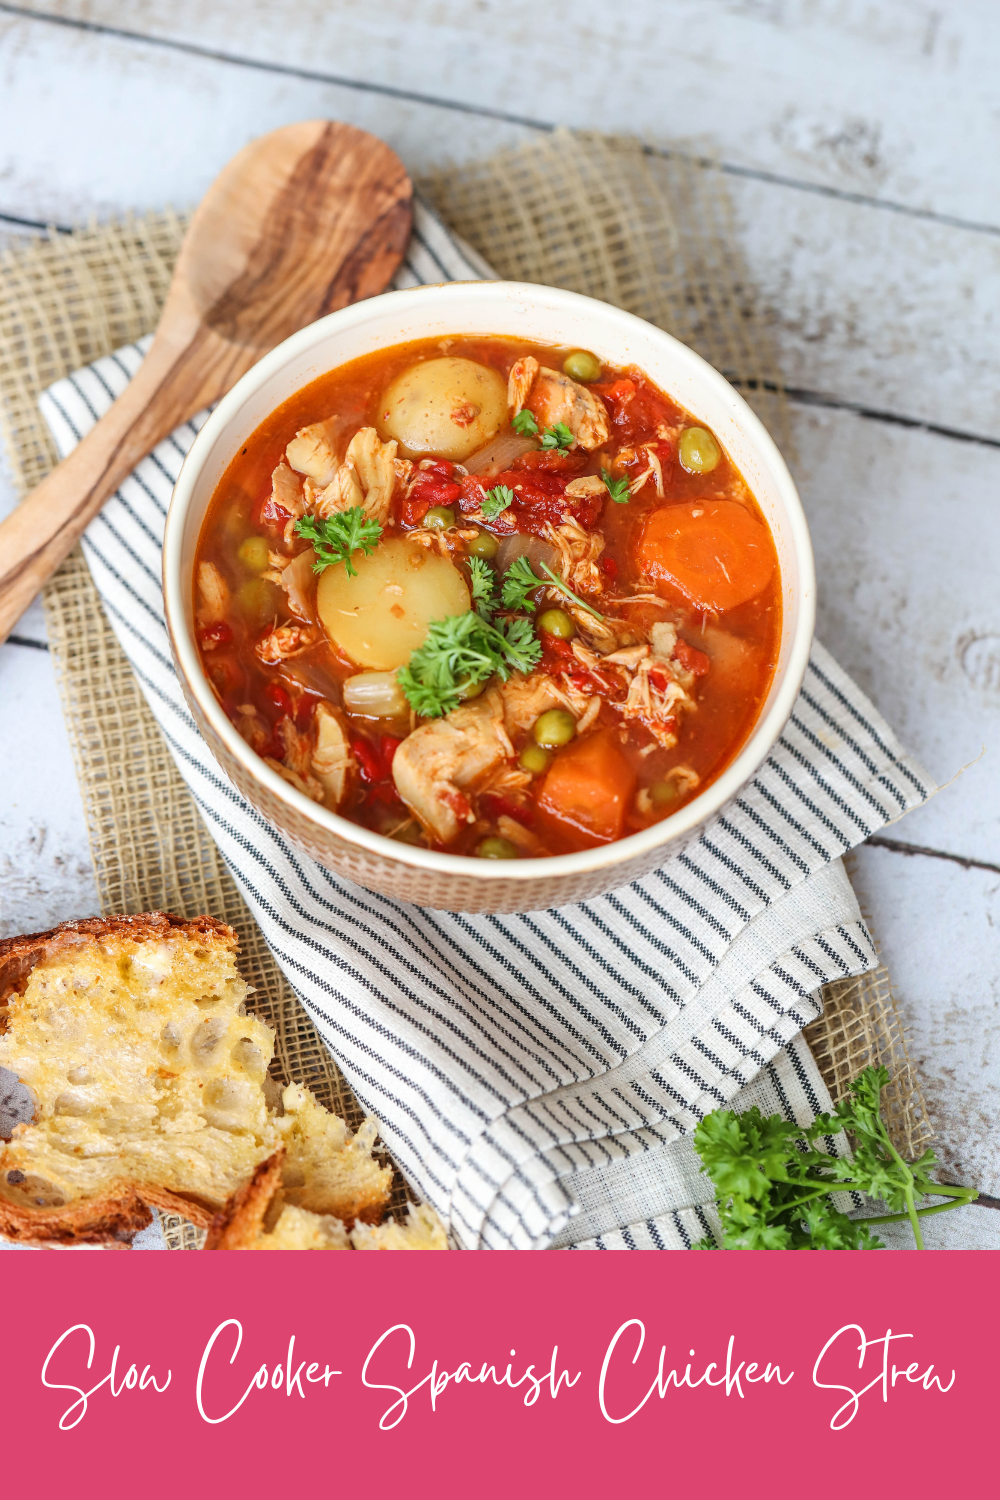 As the weather turns colder try this Spanish Chicken Stew. It will have you feeling warm and cosy in no time.